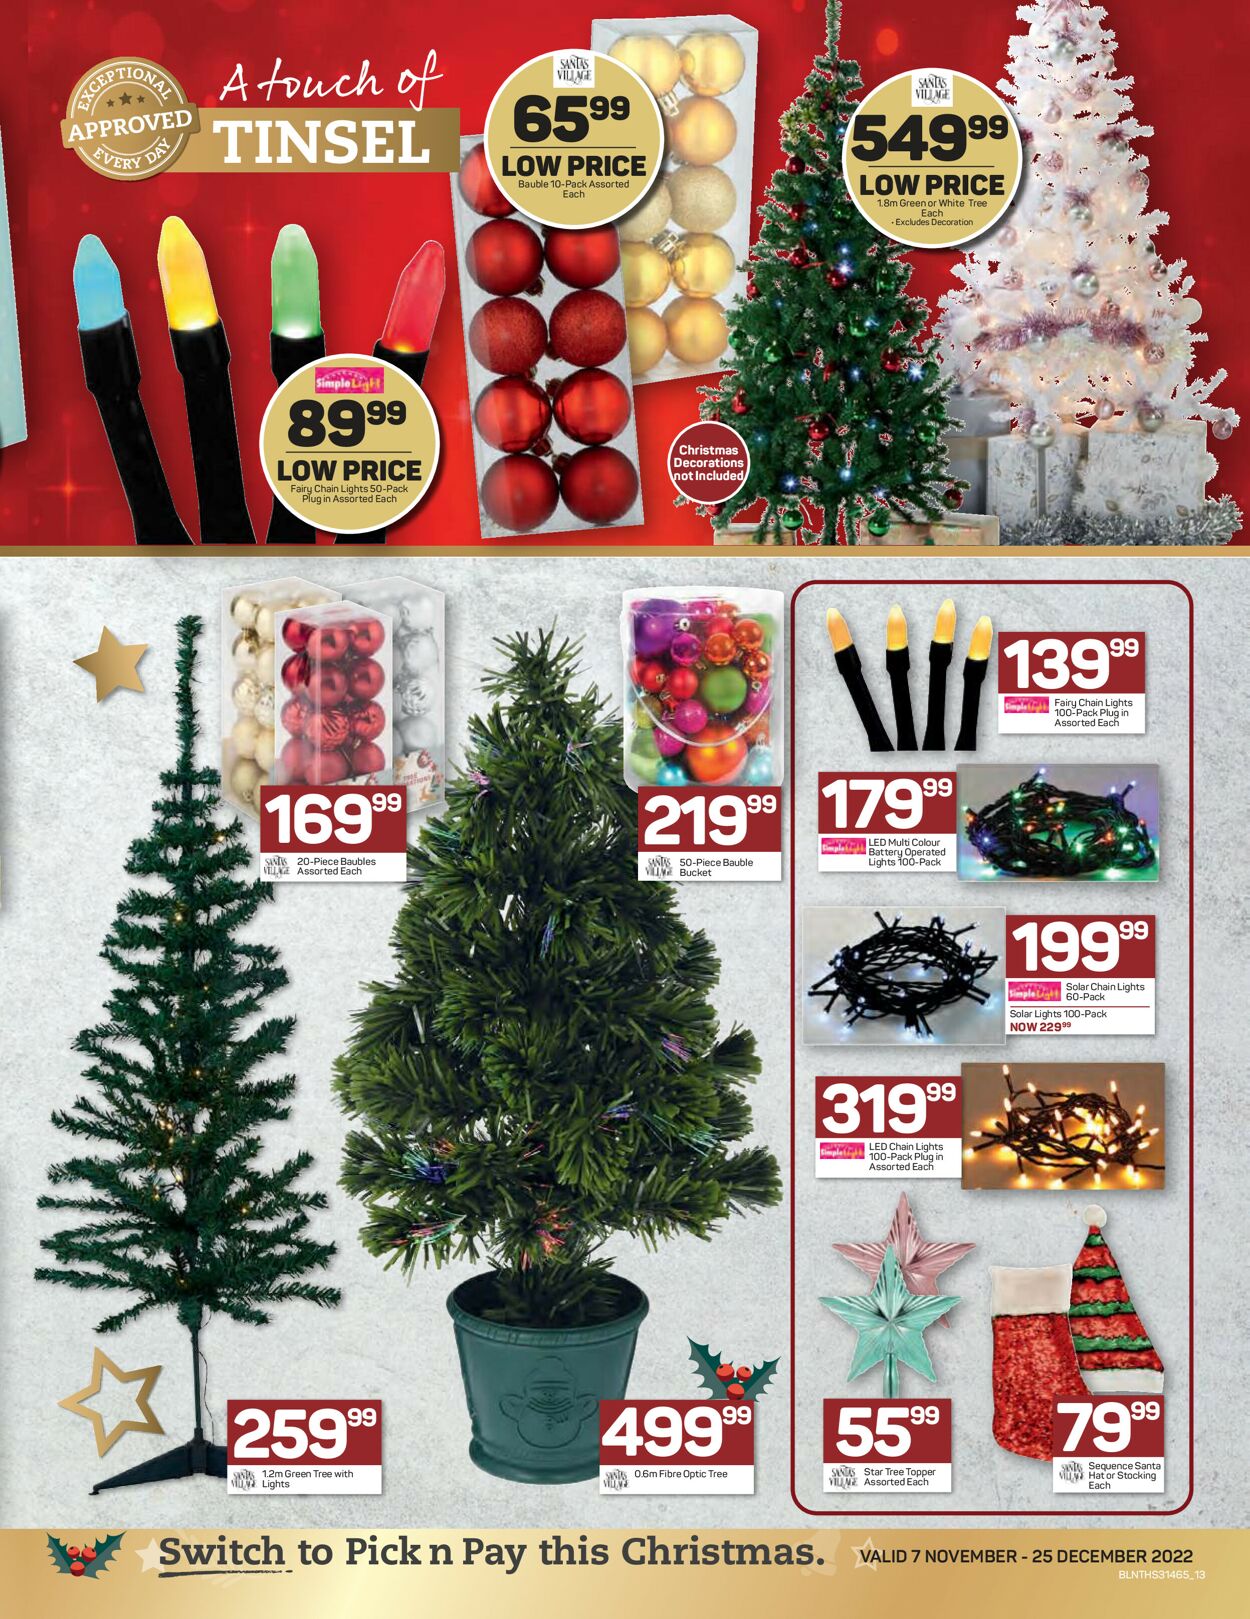 Pick n Pay Catalogue - 2022/11/07-2022/12/25 (Page 13)